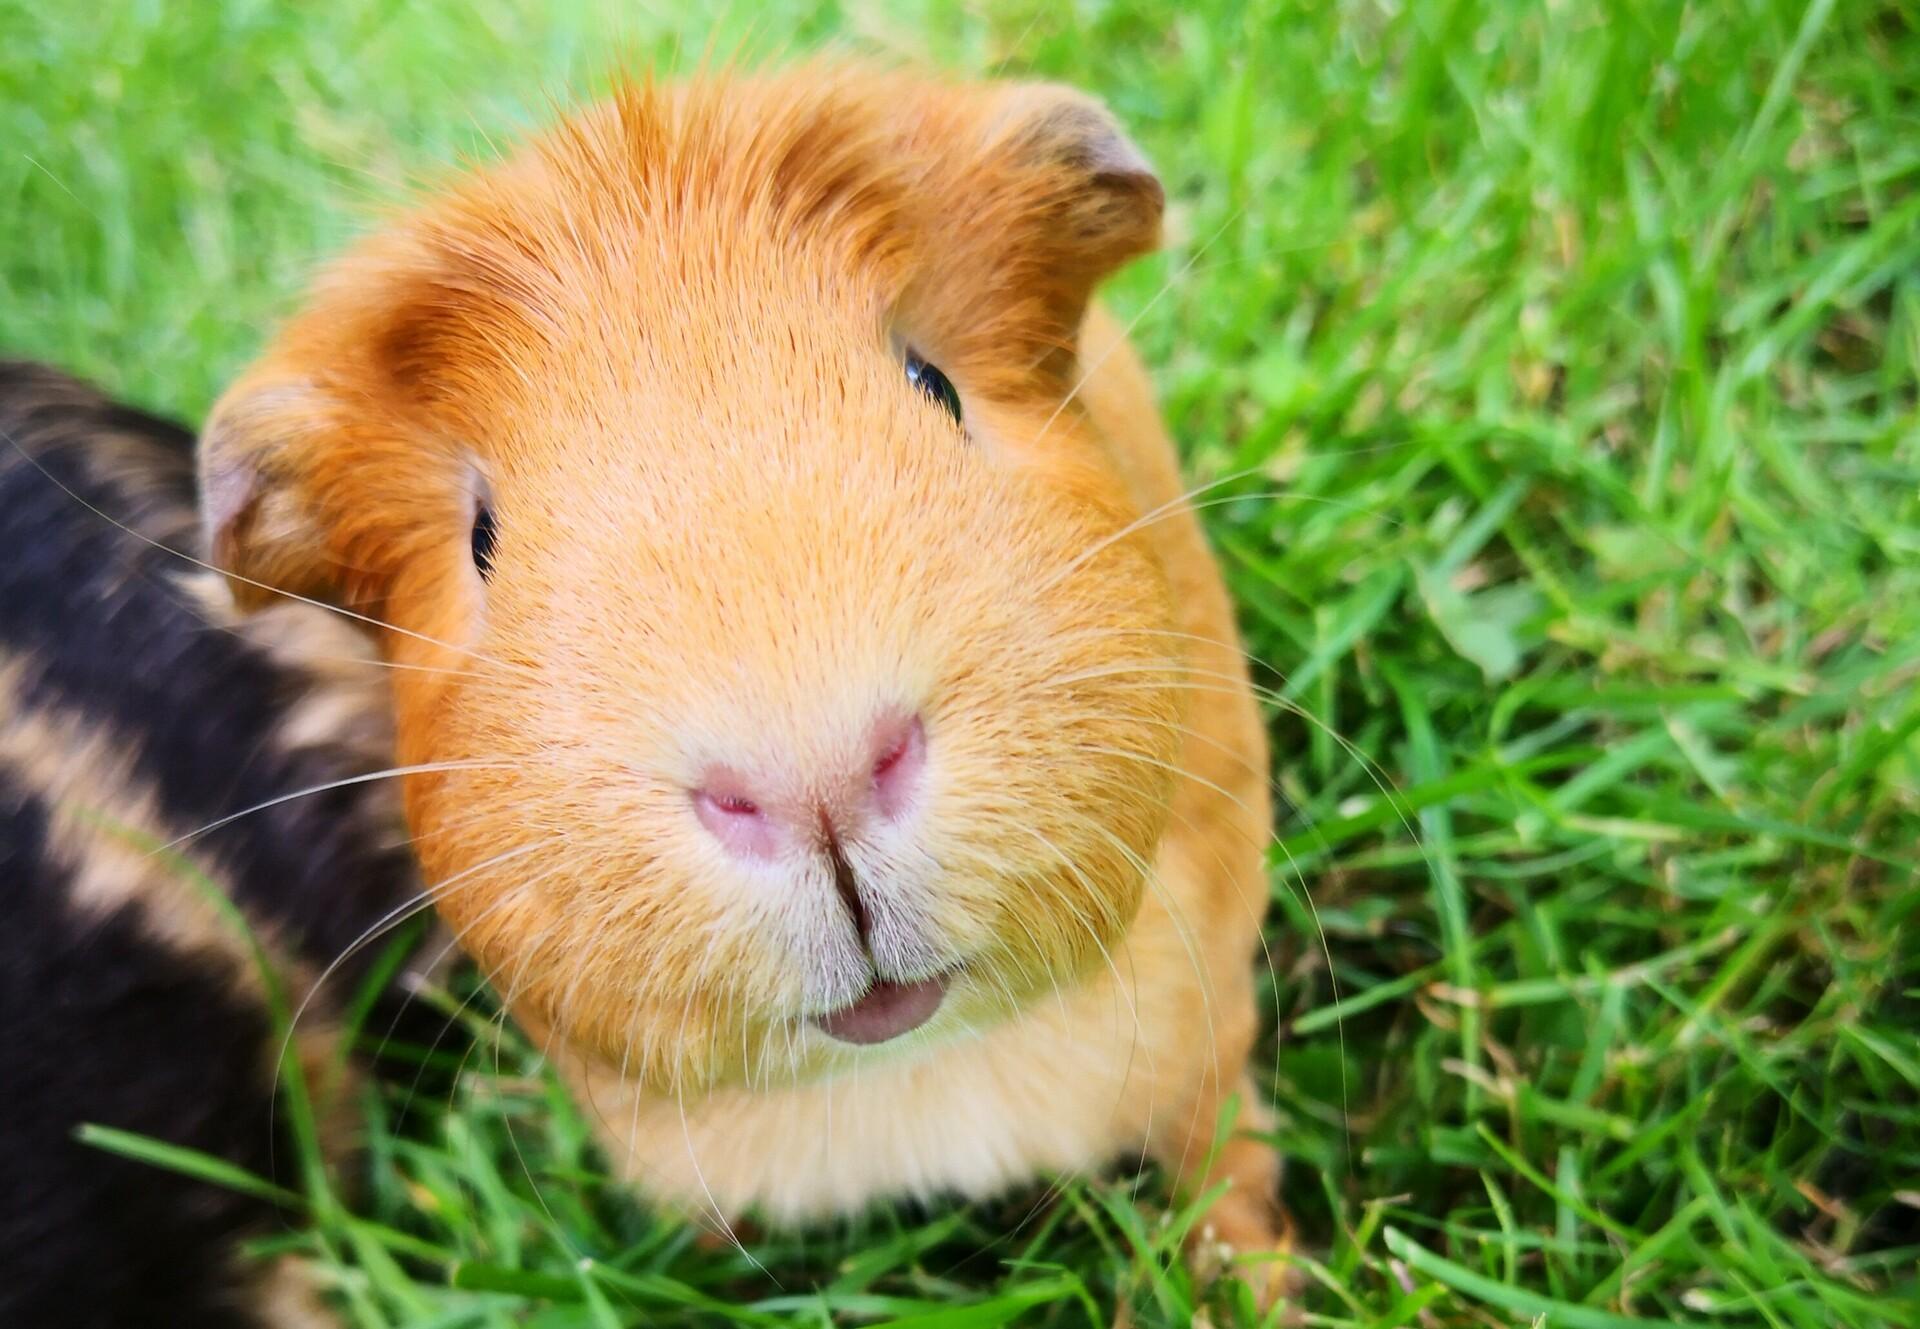 Where do guinea pigs live in the world?